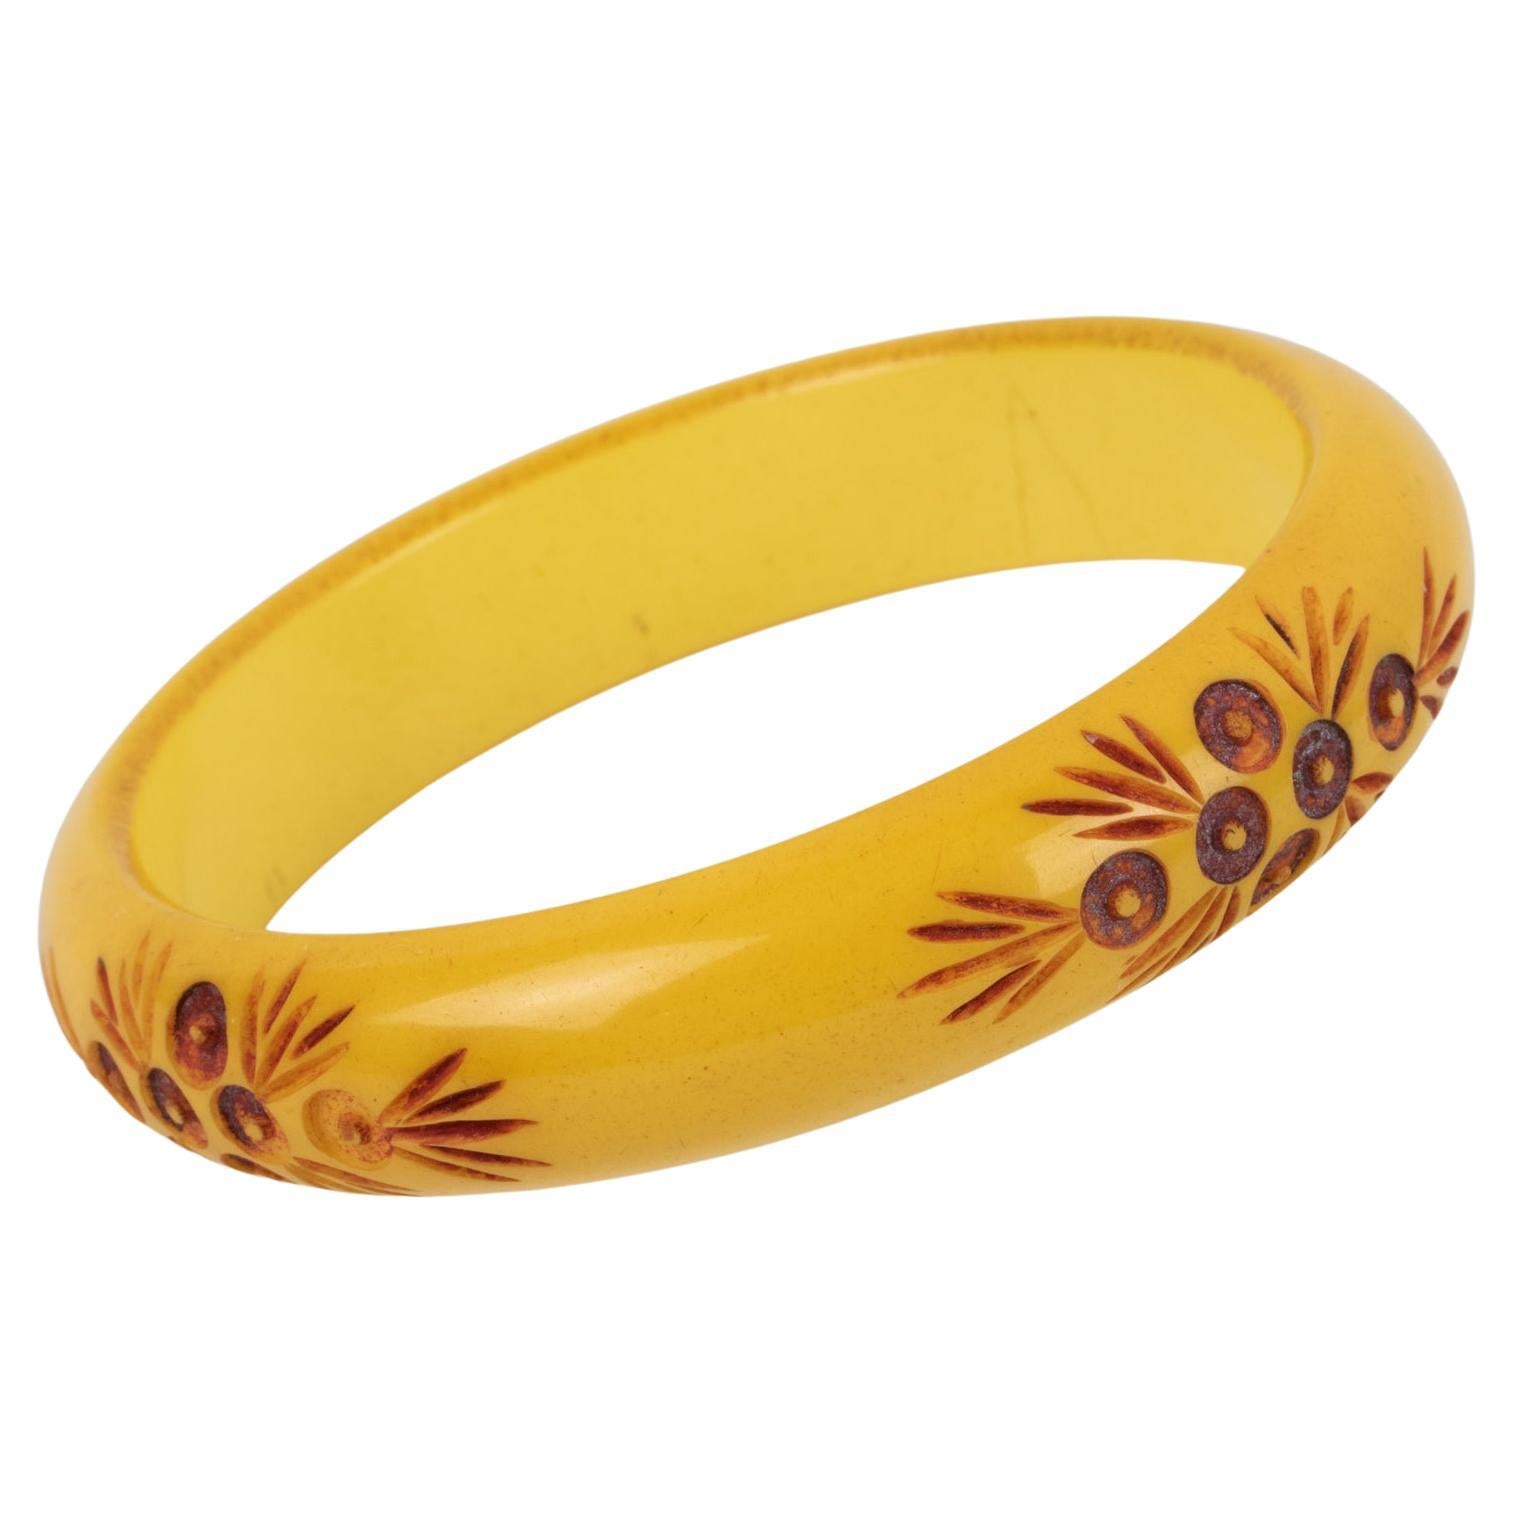 Bakelite Bracelet Bangle Yellow Creamed Corn with Carved Red Flowers